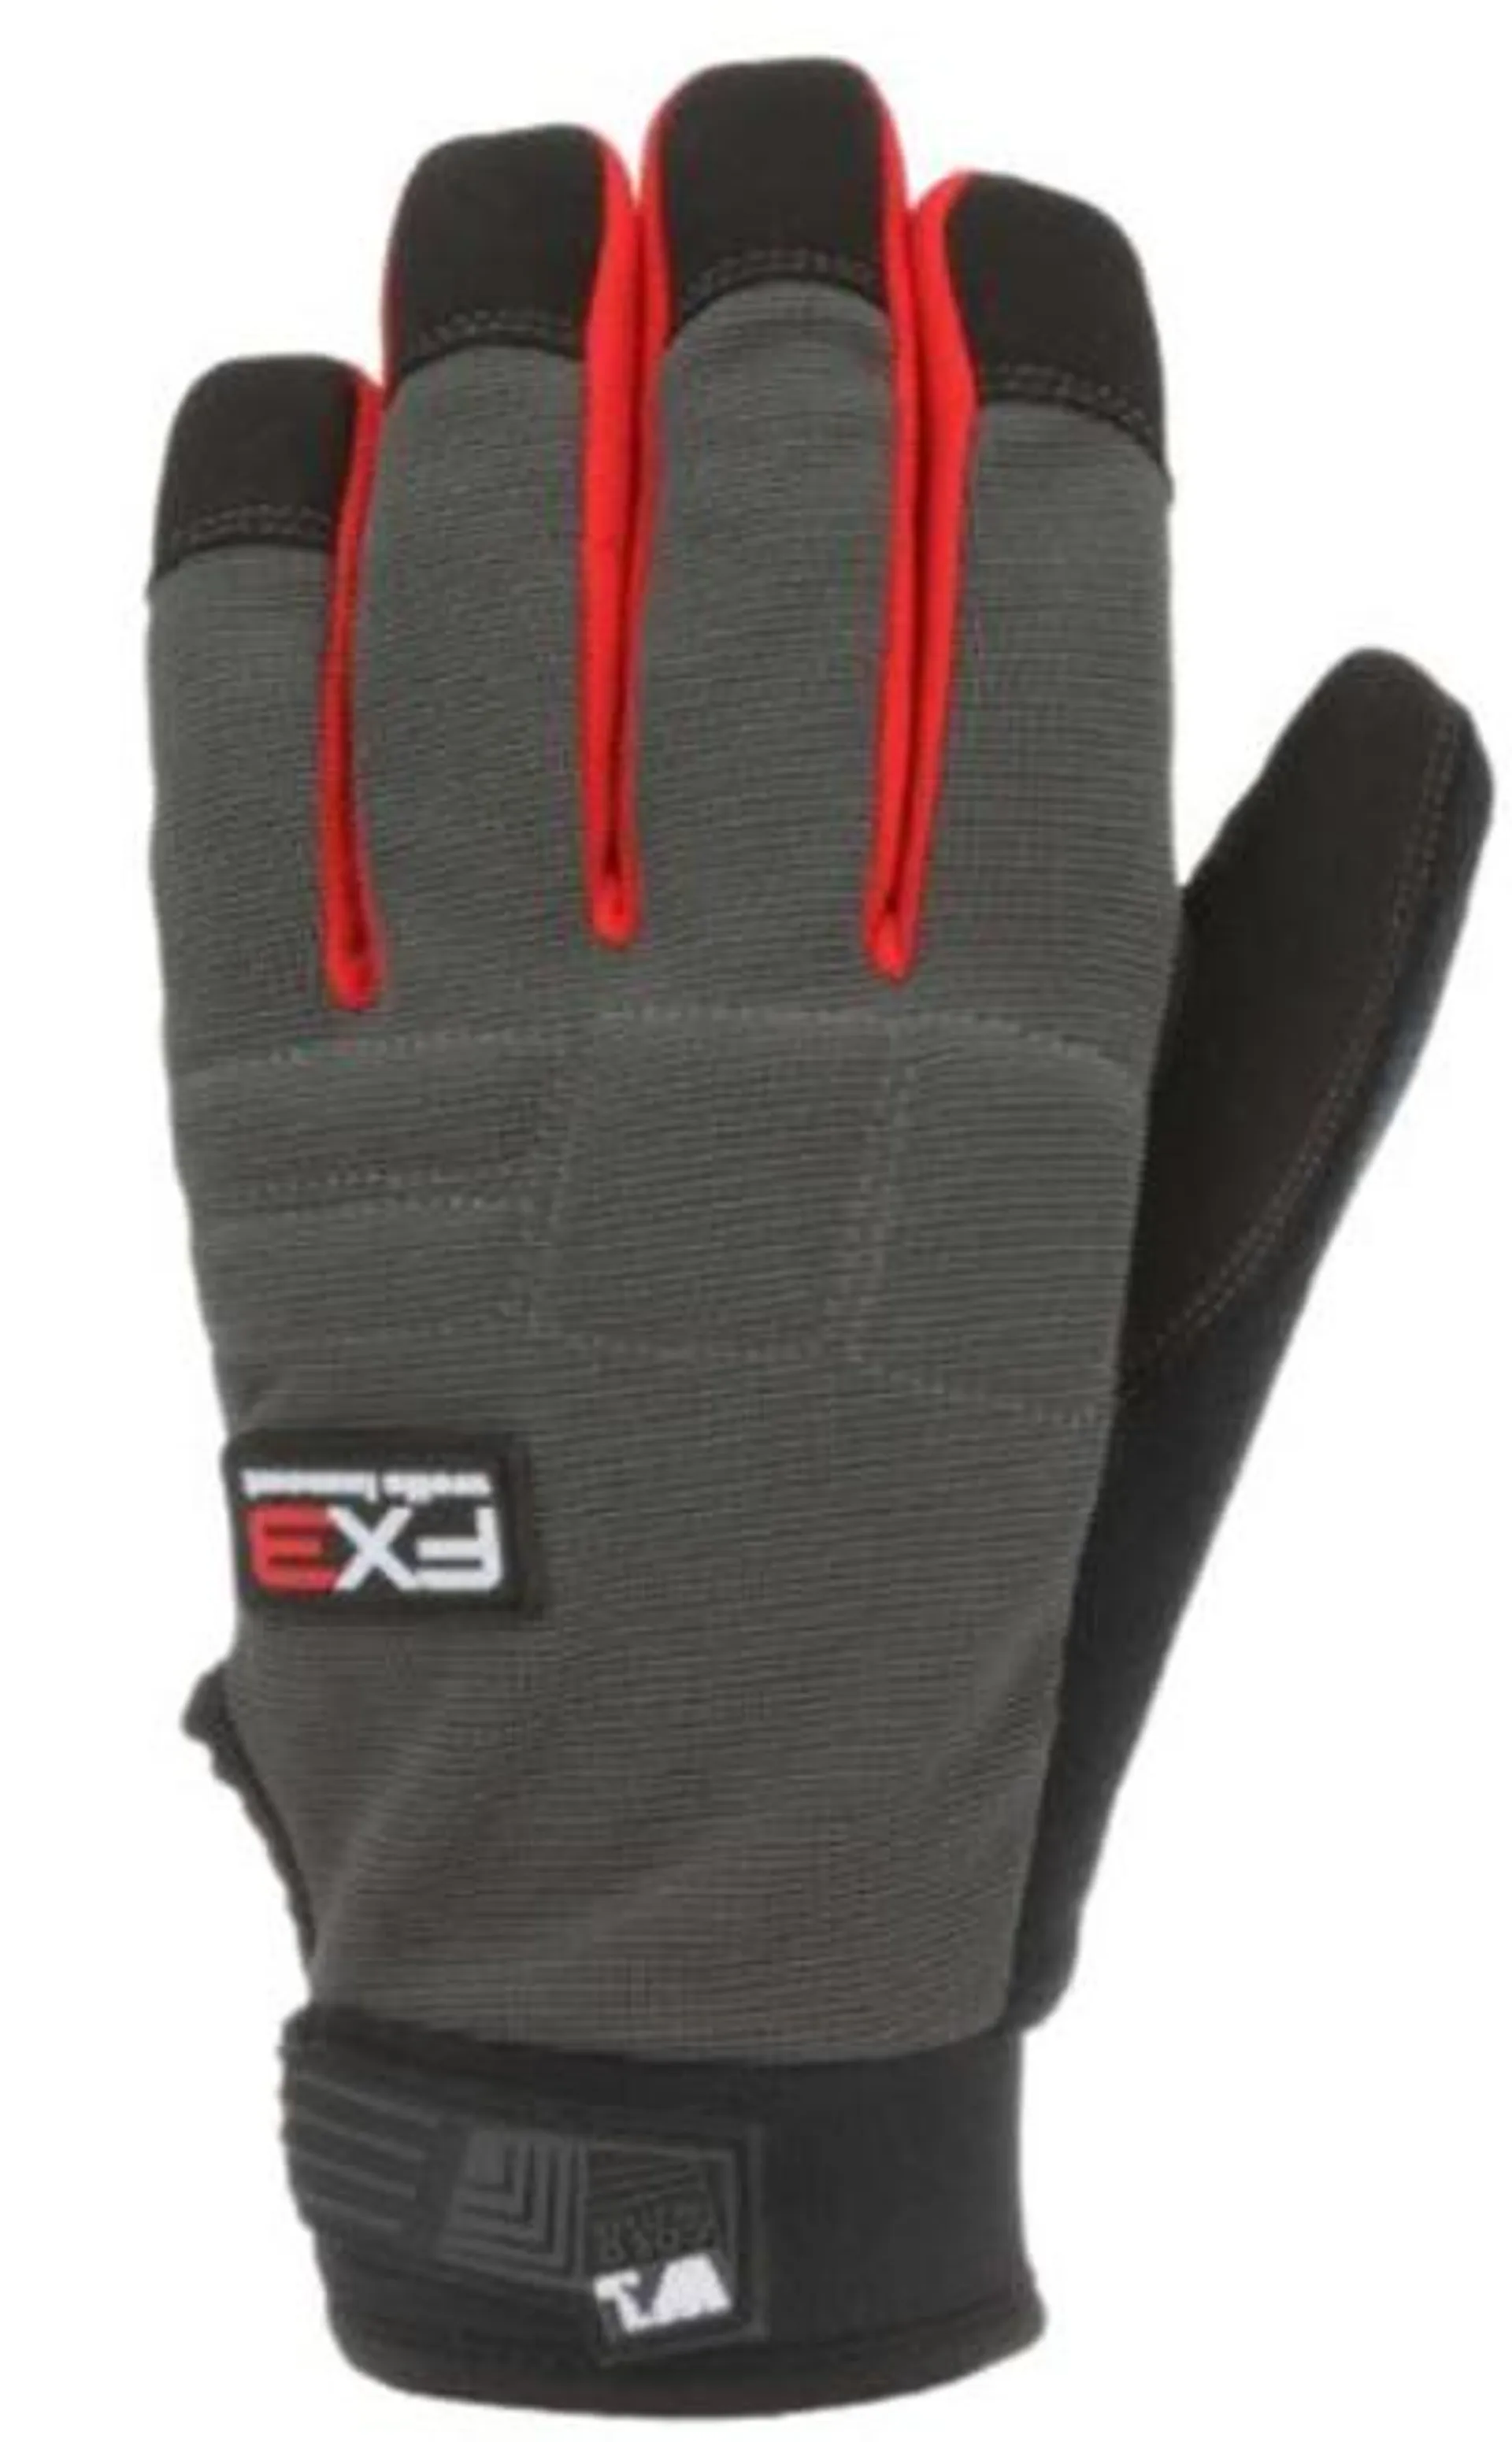 Wells Lamont Men's FX3 Fleece Lined Synthetic Leather Red/Grey Gloves